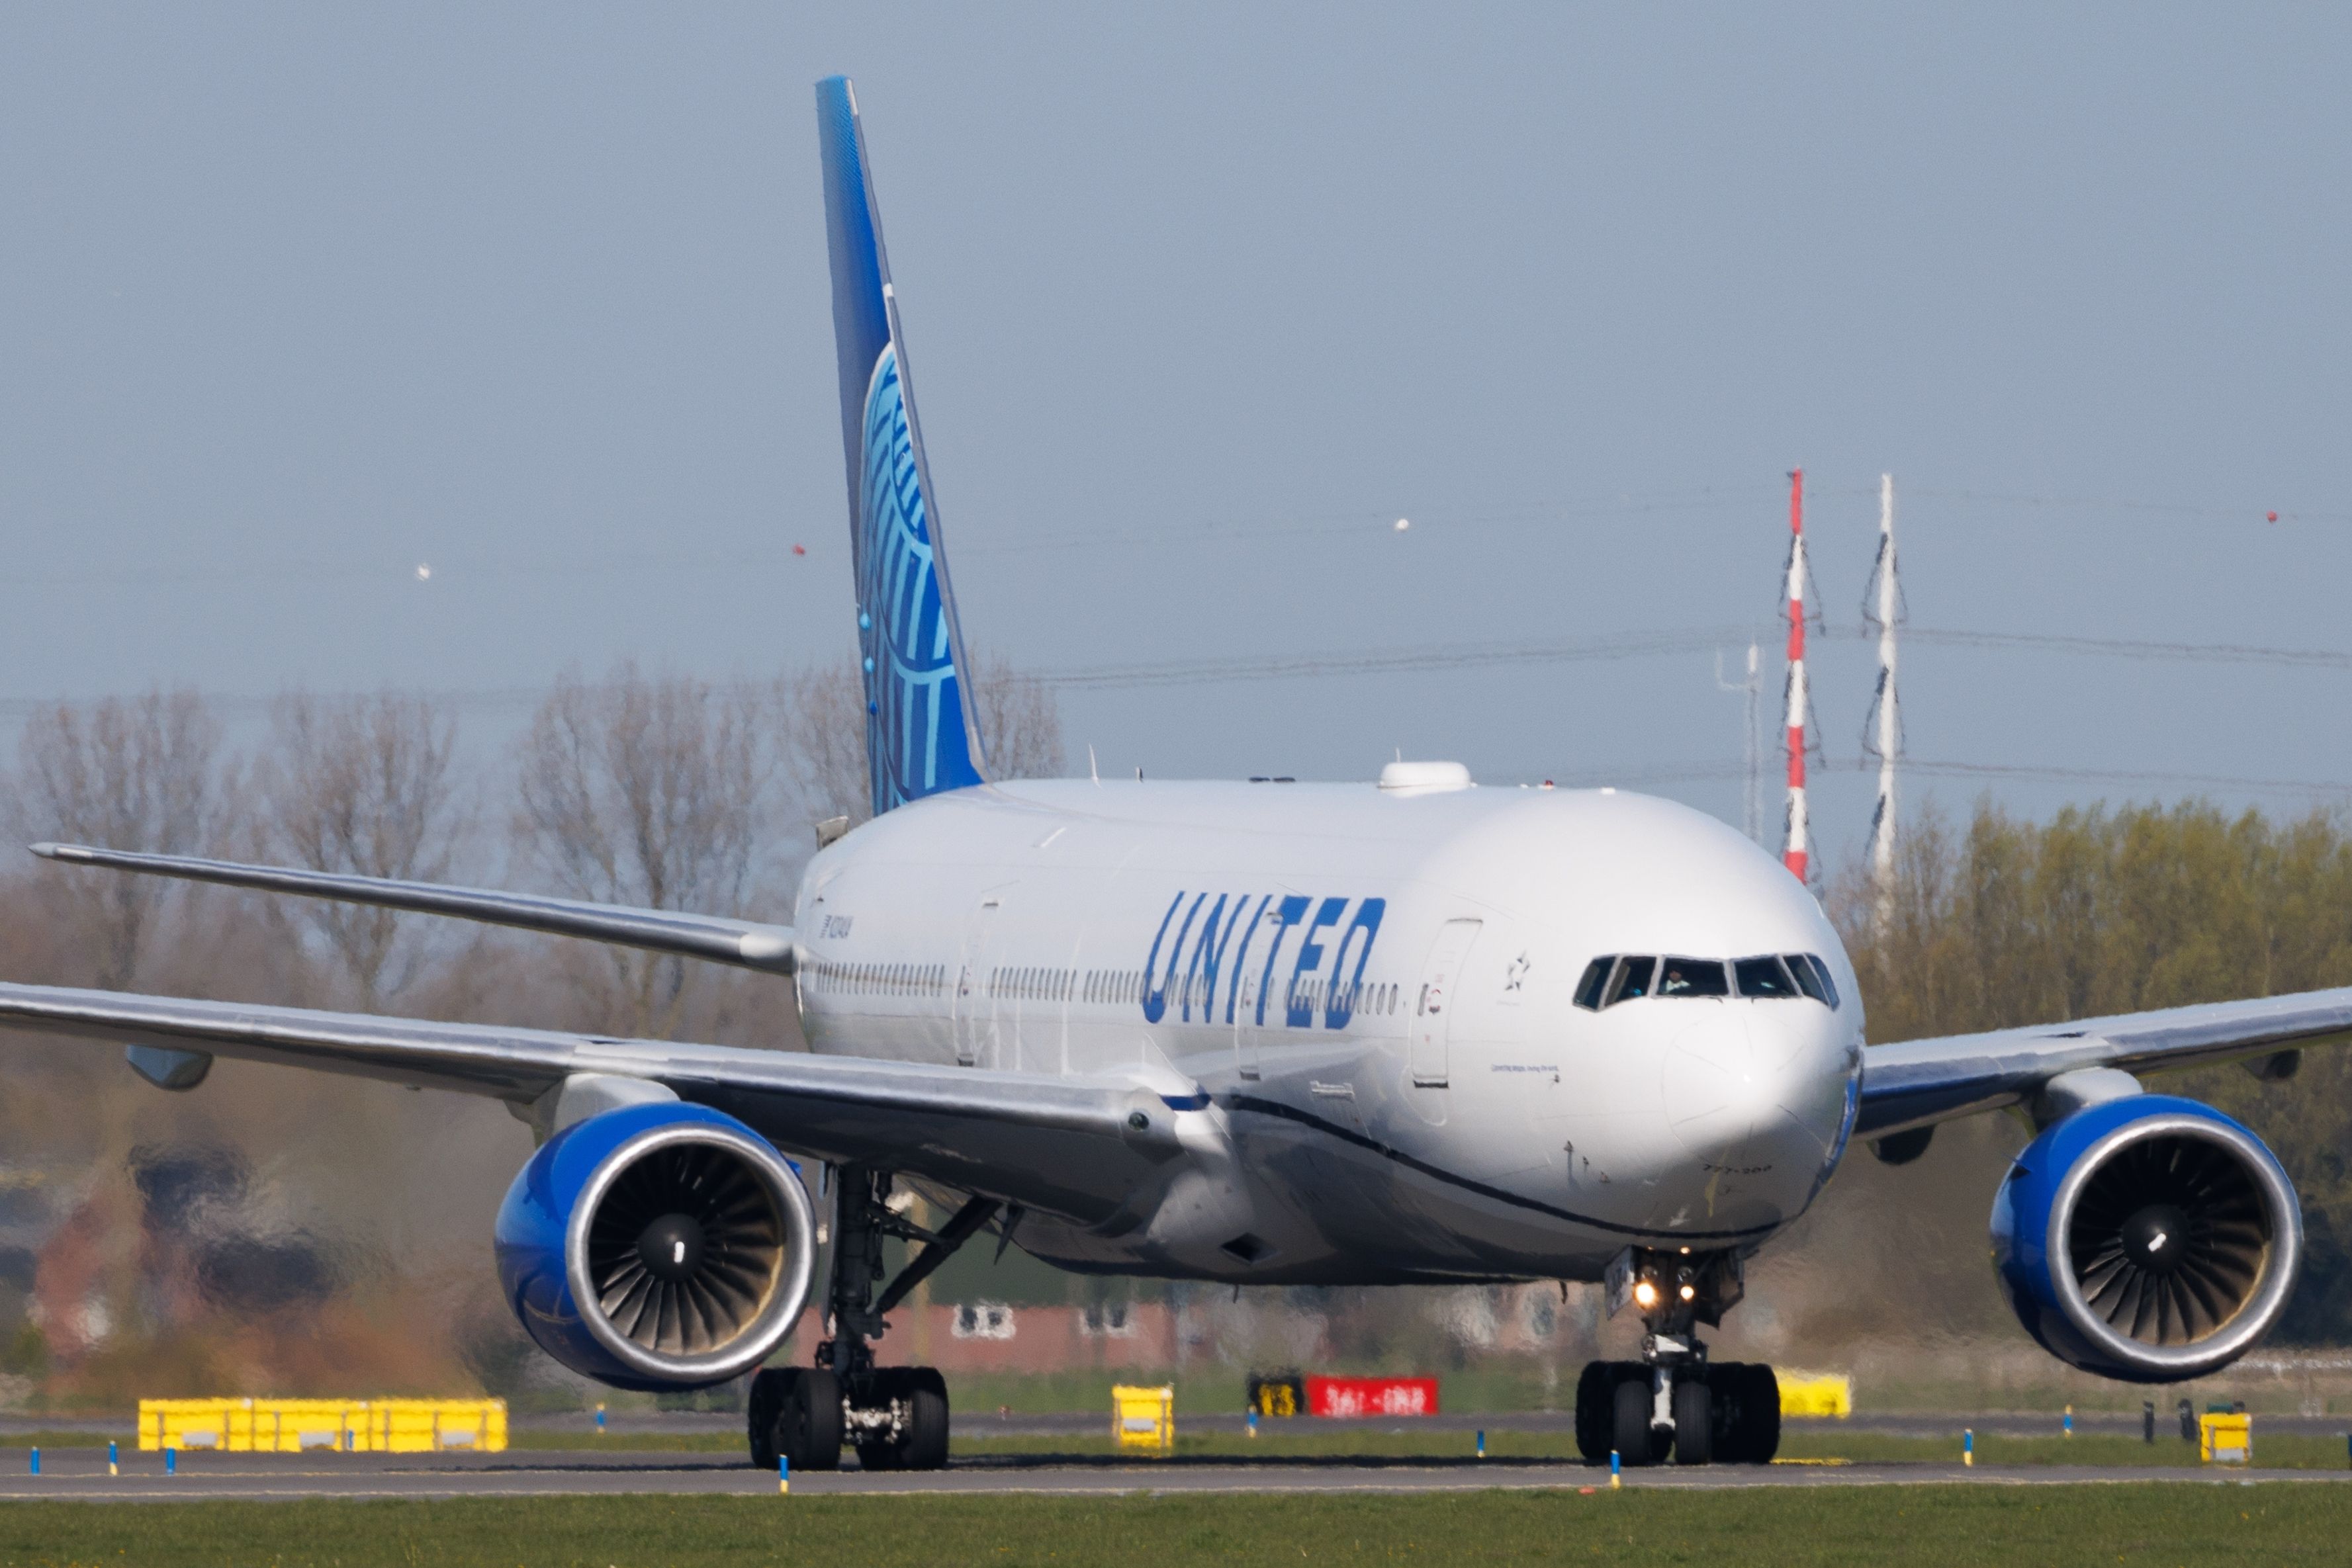 A United Airlines Boeing 777 on the apron at Amsterdam Schiphol Airport.